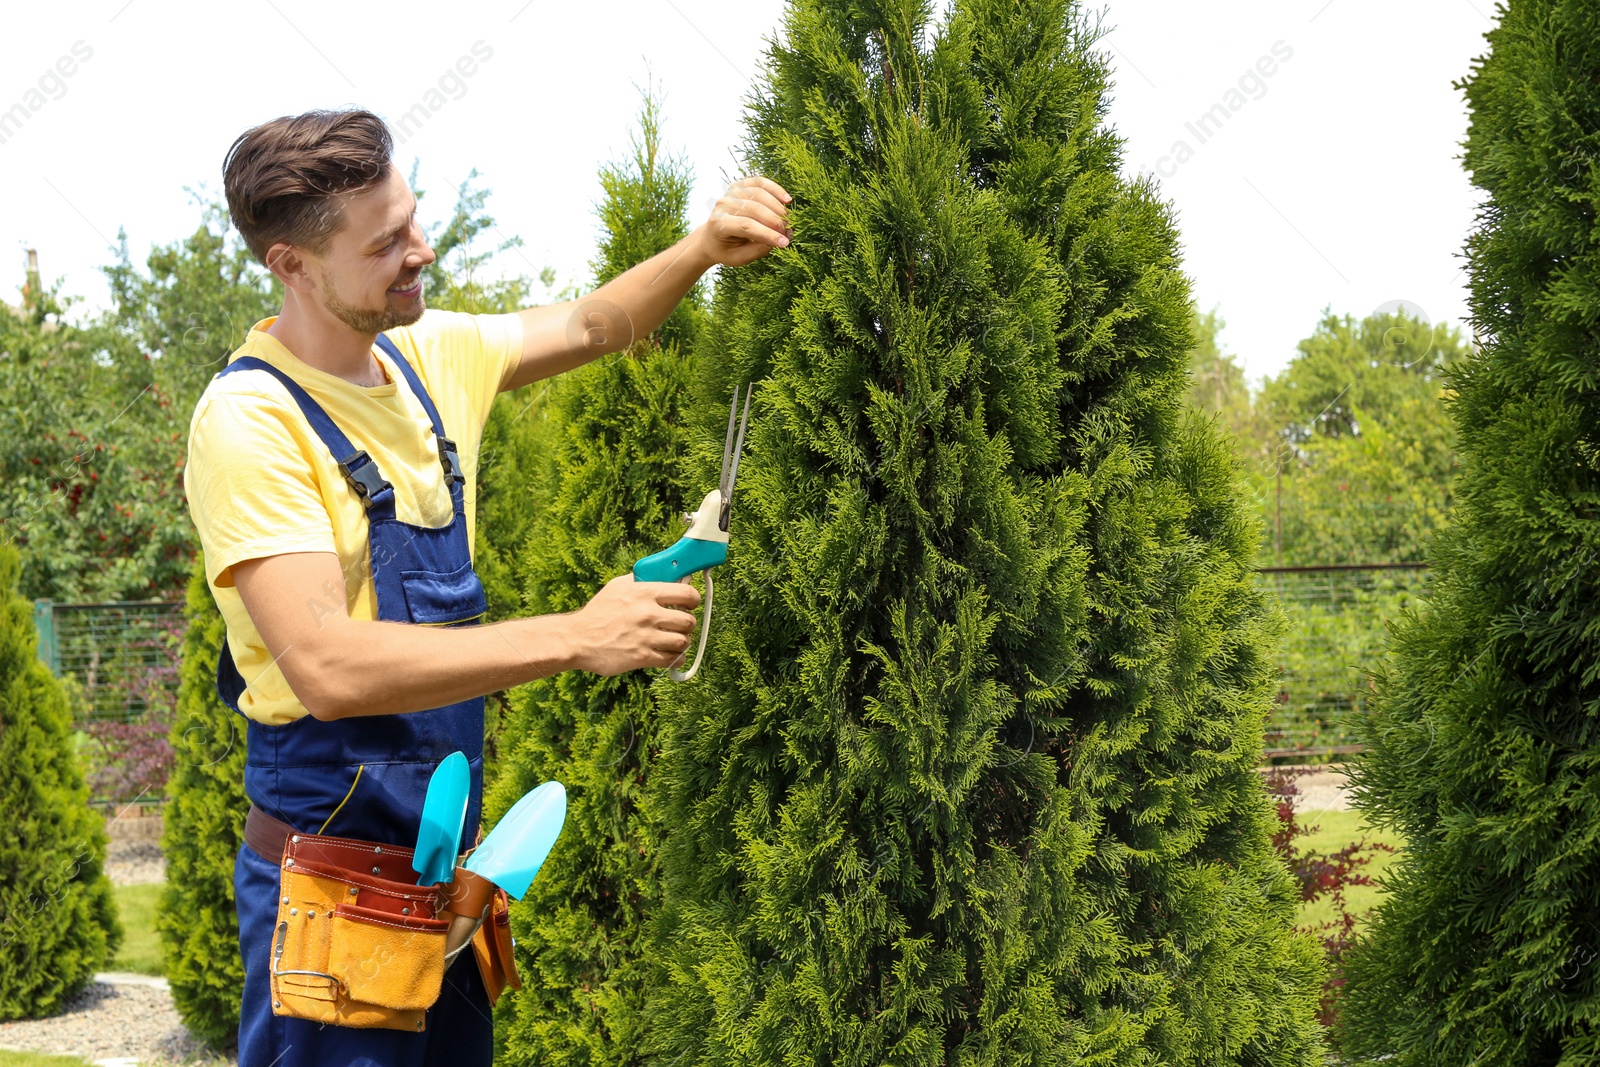 Photo of Man trimming bushes in garden on sunny day